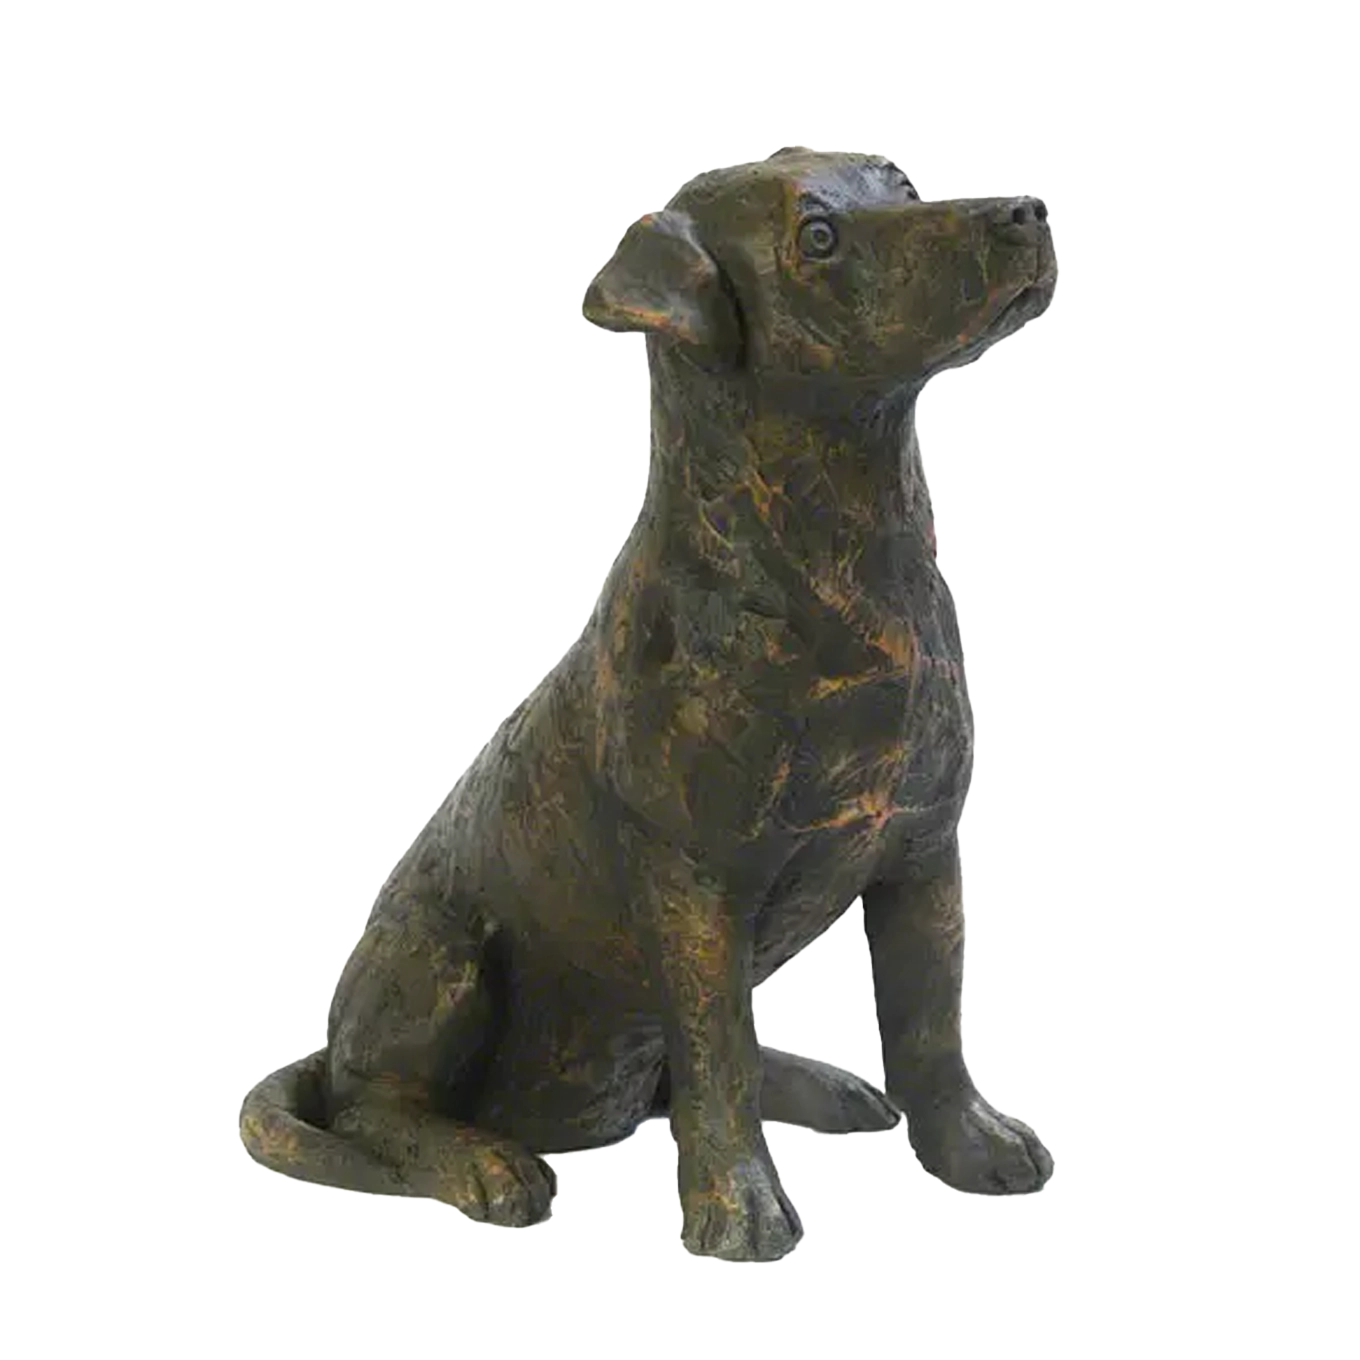 JACK RUSSELL URN Our Jack Russell Urn beautifully reflects this active, independent, and clever little dog. A perfect resting place and memorial for your much loved pet JRT. This Jack Russell Urn has a hollow interior that will hold the whole of your pet’s ashes.